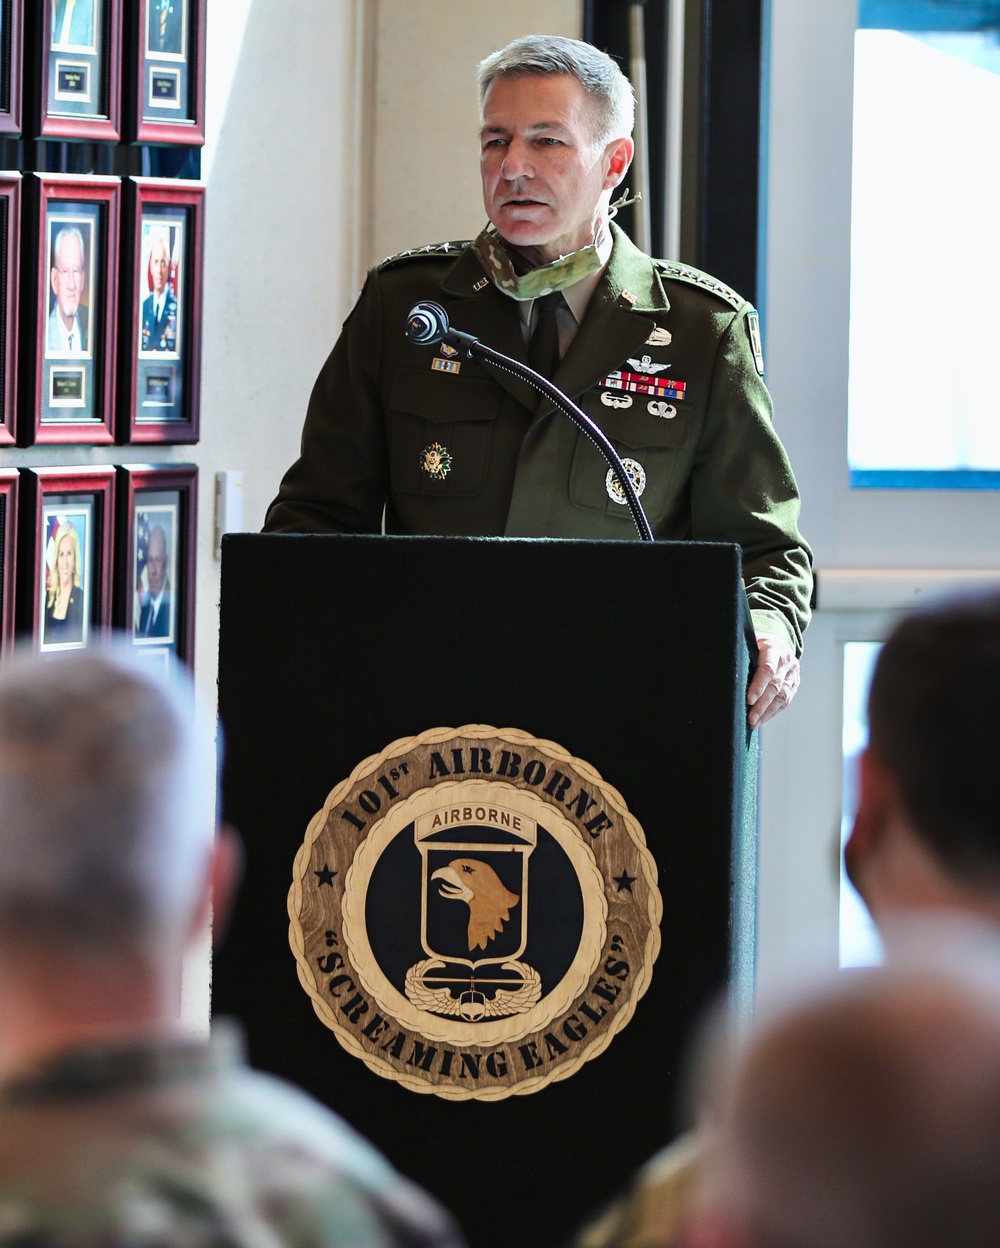 General McConville gives speech at Col. King’s promotion